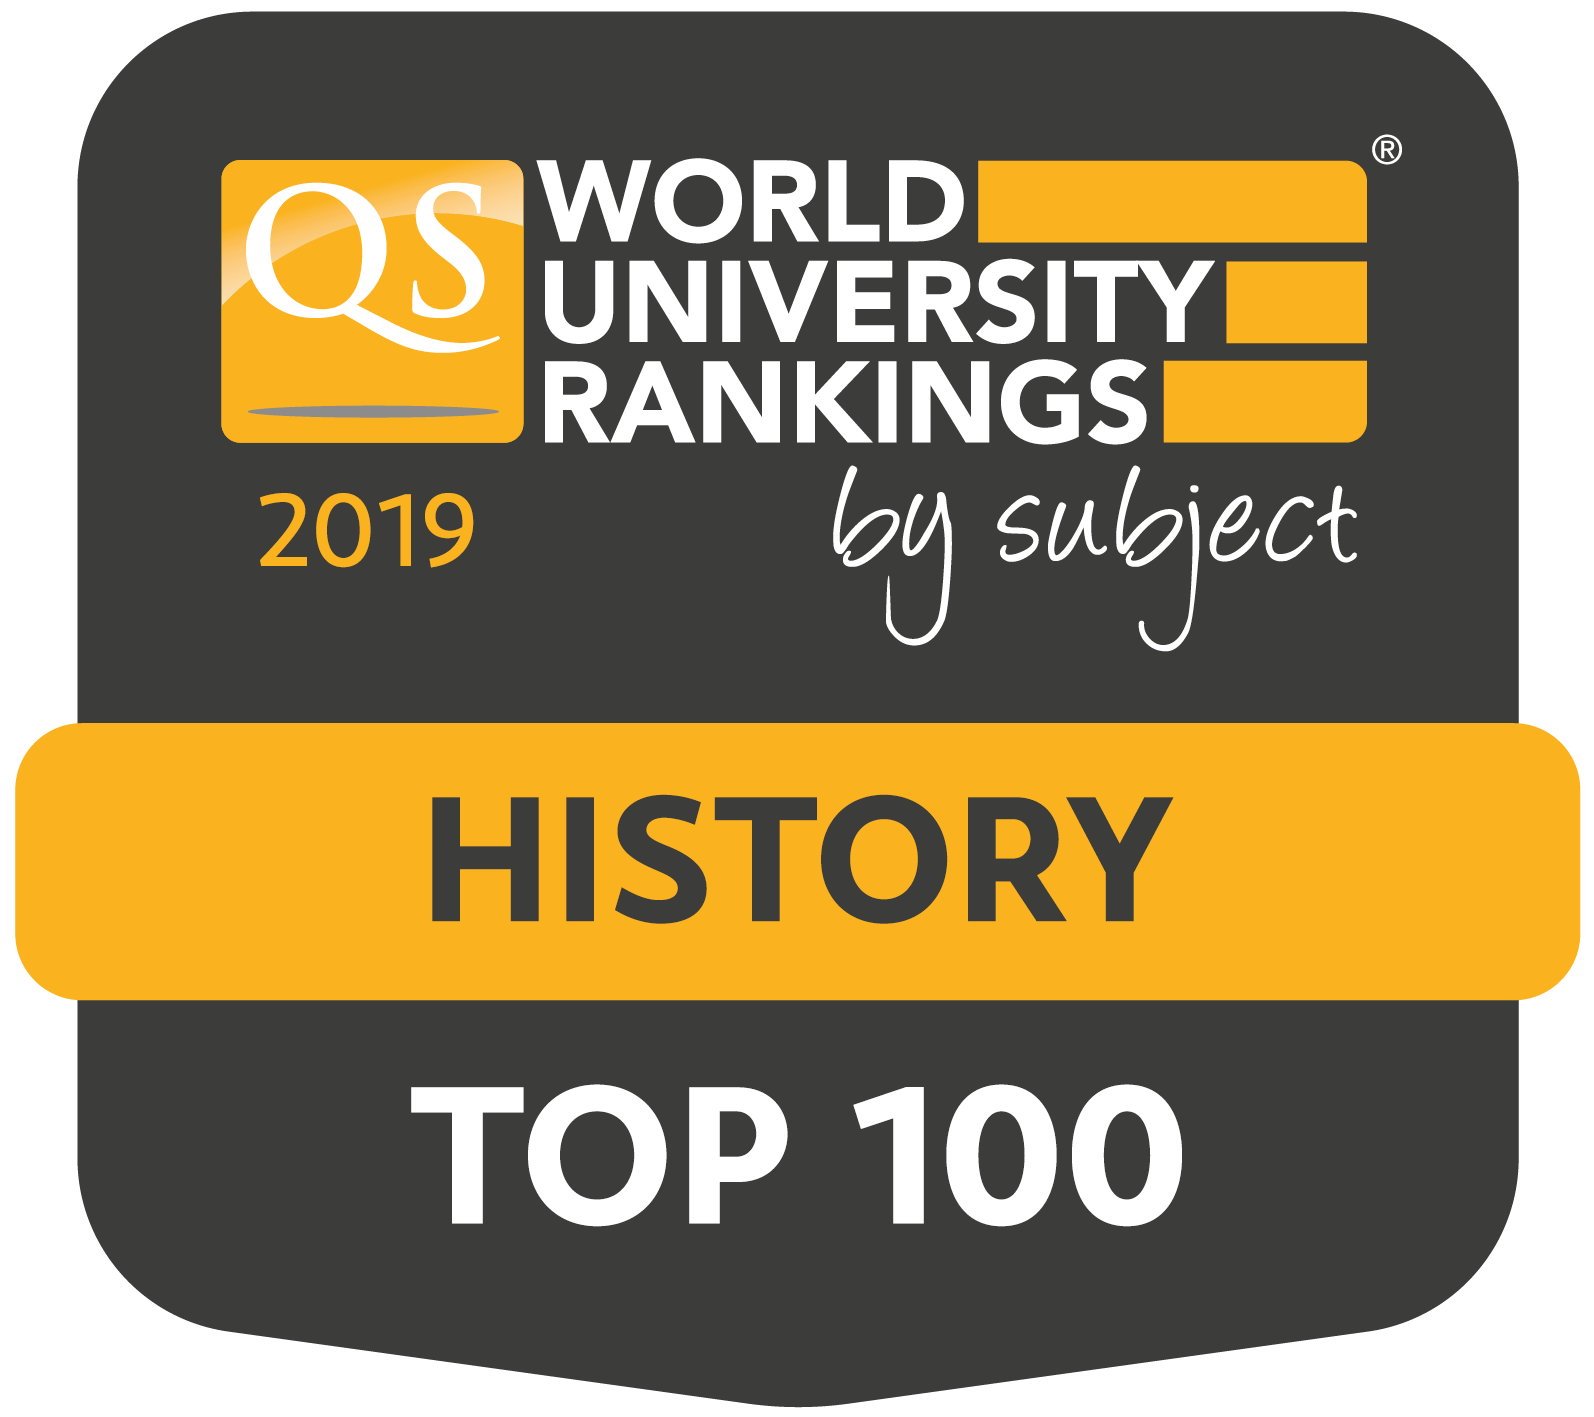 Qs world ranking. QS by subject. QS by subject rankings” logo. World University rankings by subject. QS World rankings logo.